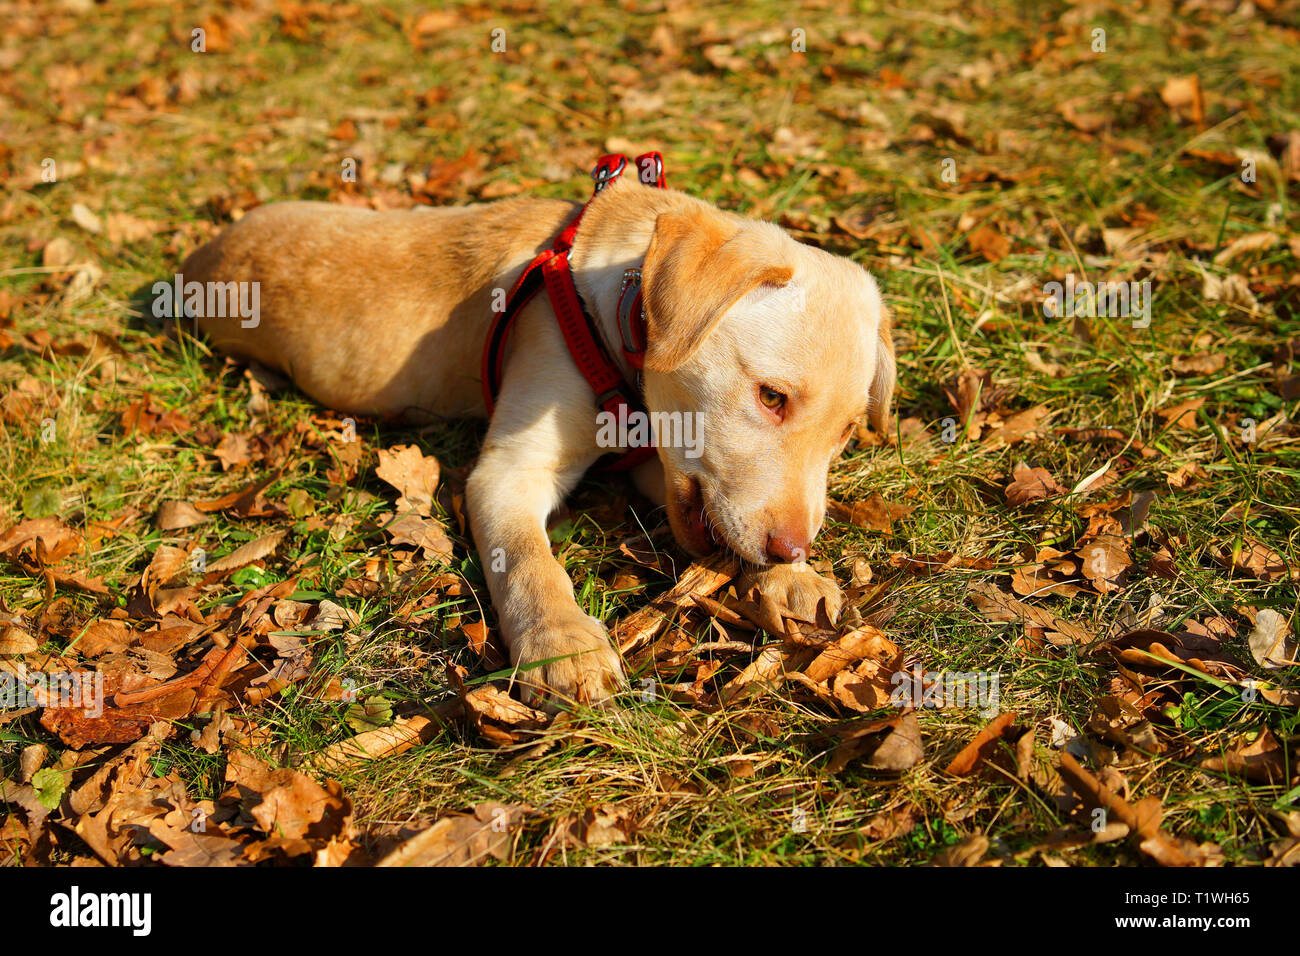 Cute young labrador puppy dog playing on the grass, chews on a stick. Stock Photo